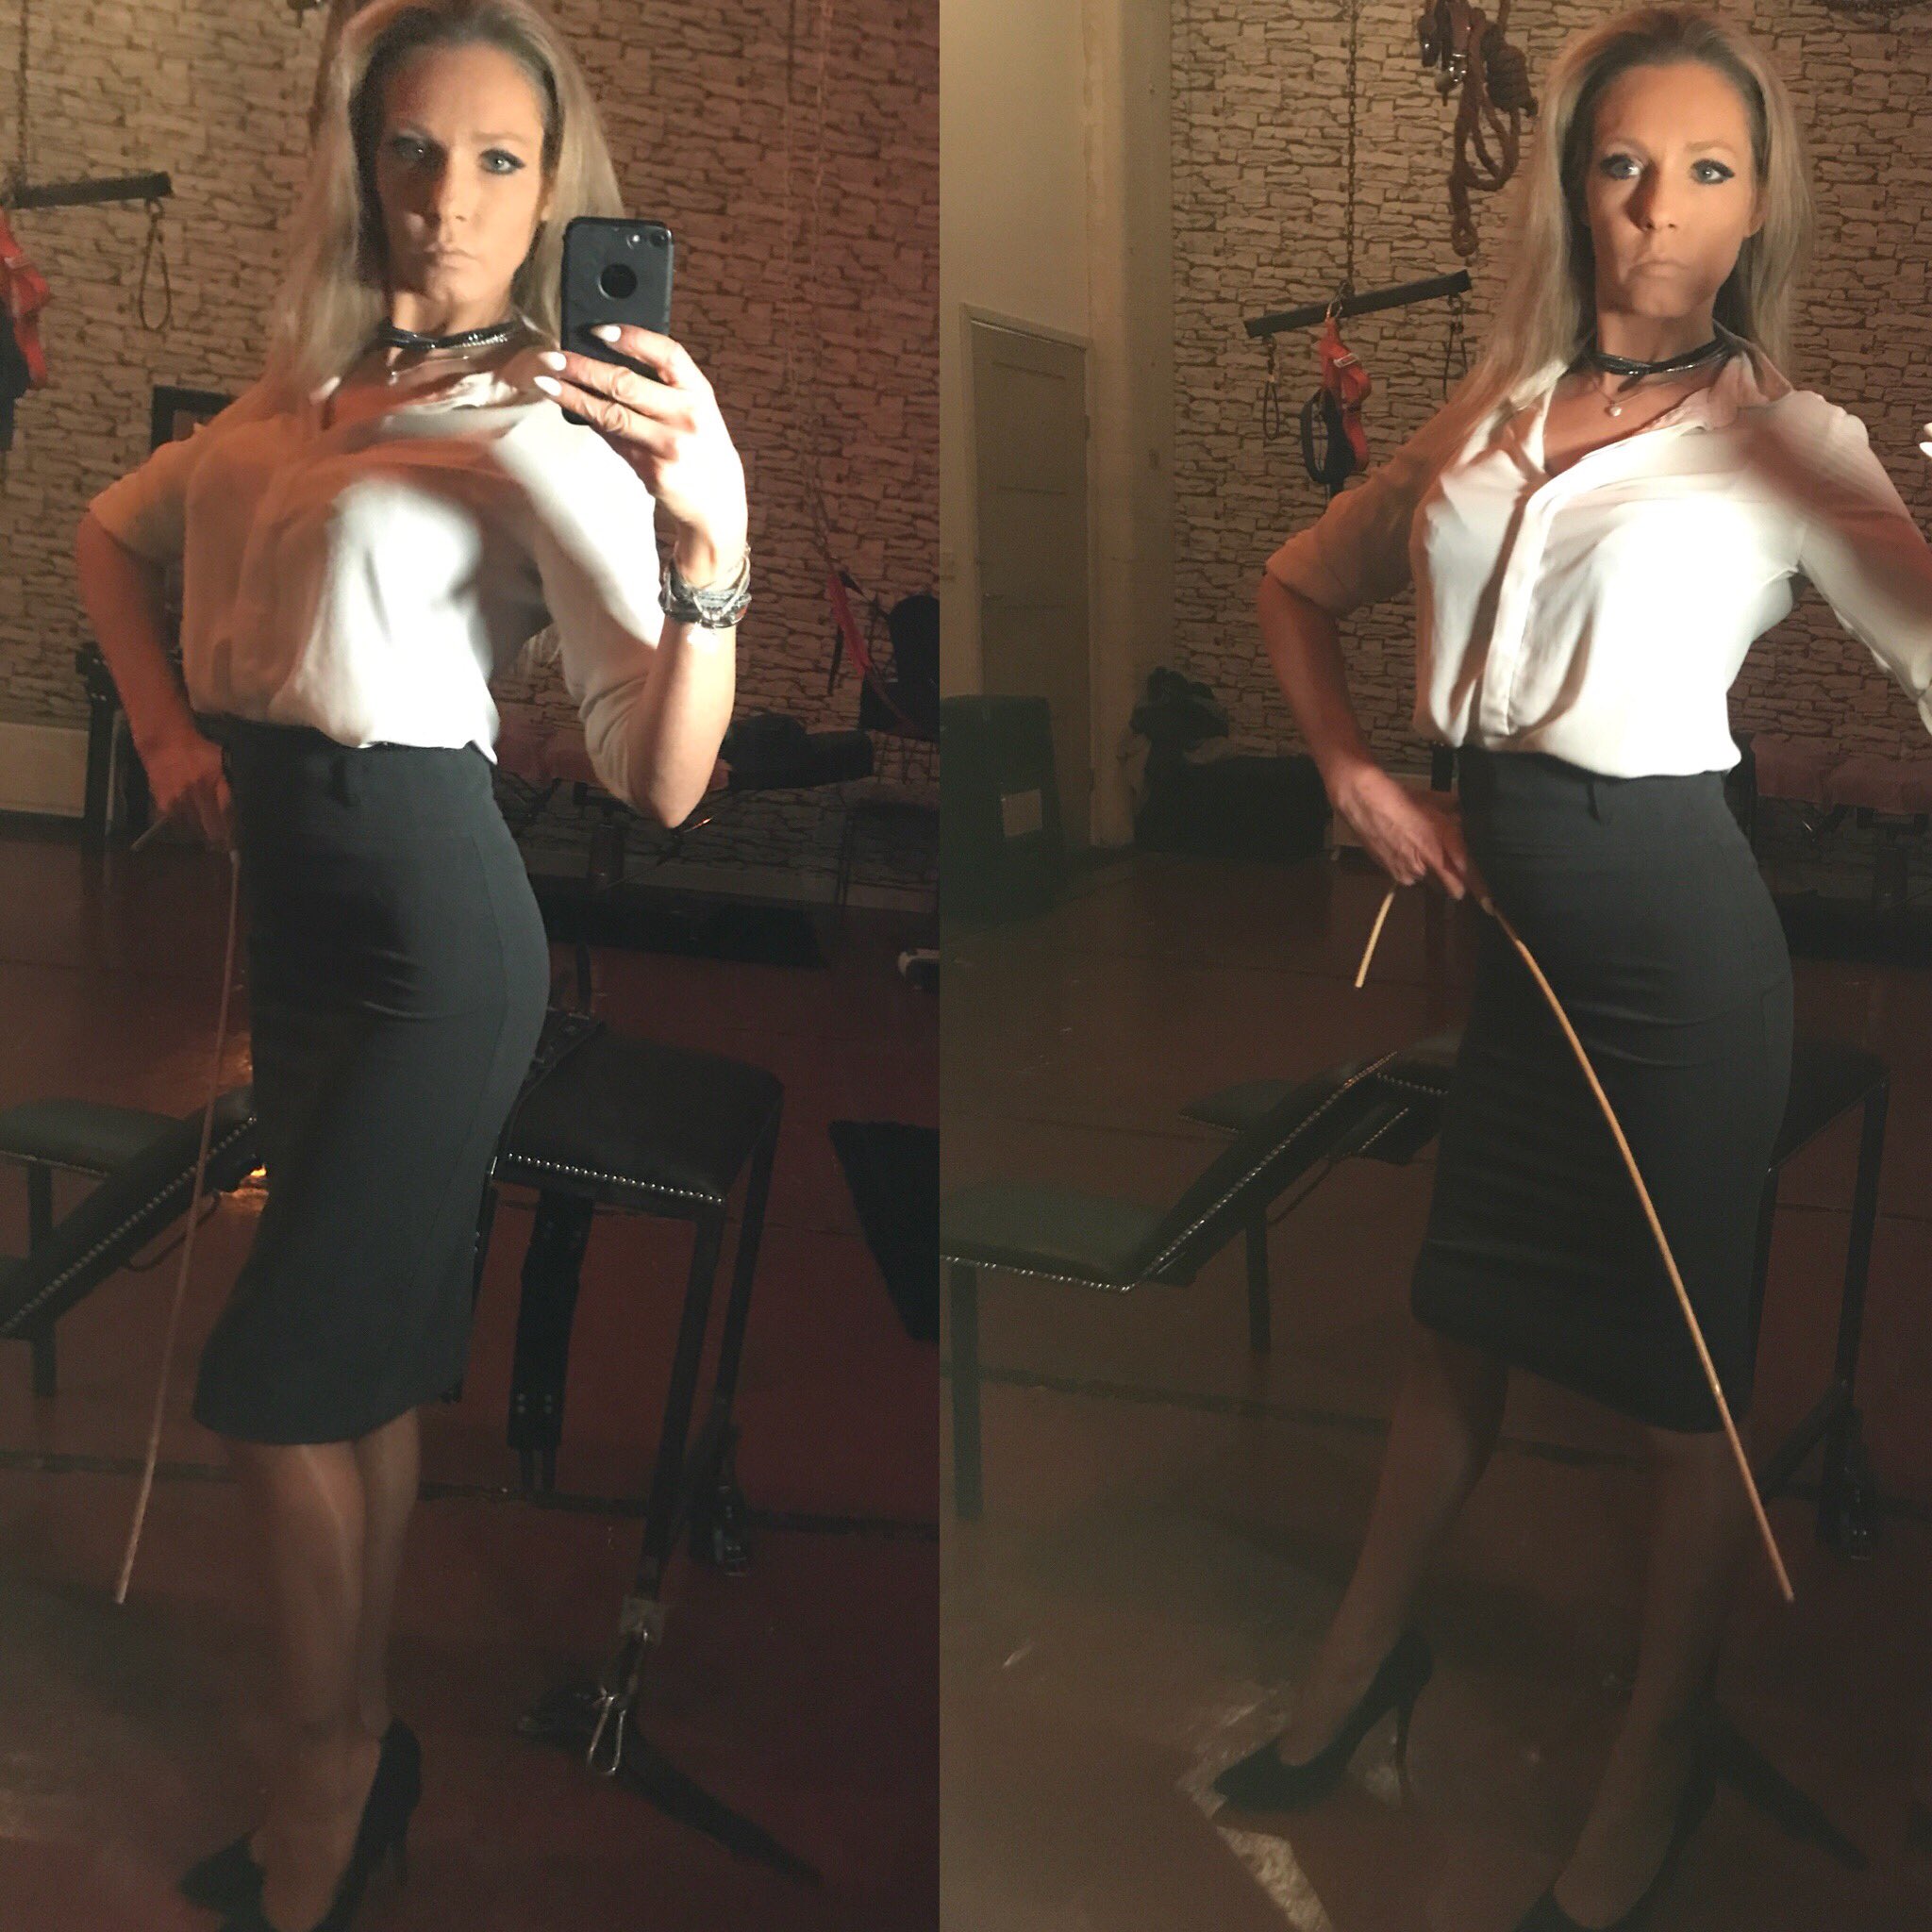 LDA ❤ on Twitter: "Headmistress this morning! Caned my very 